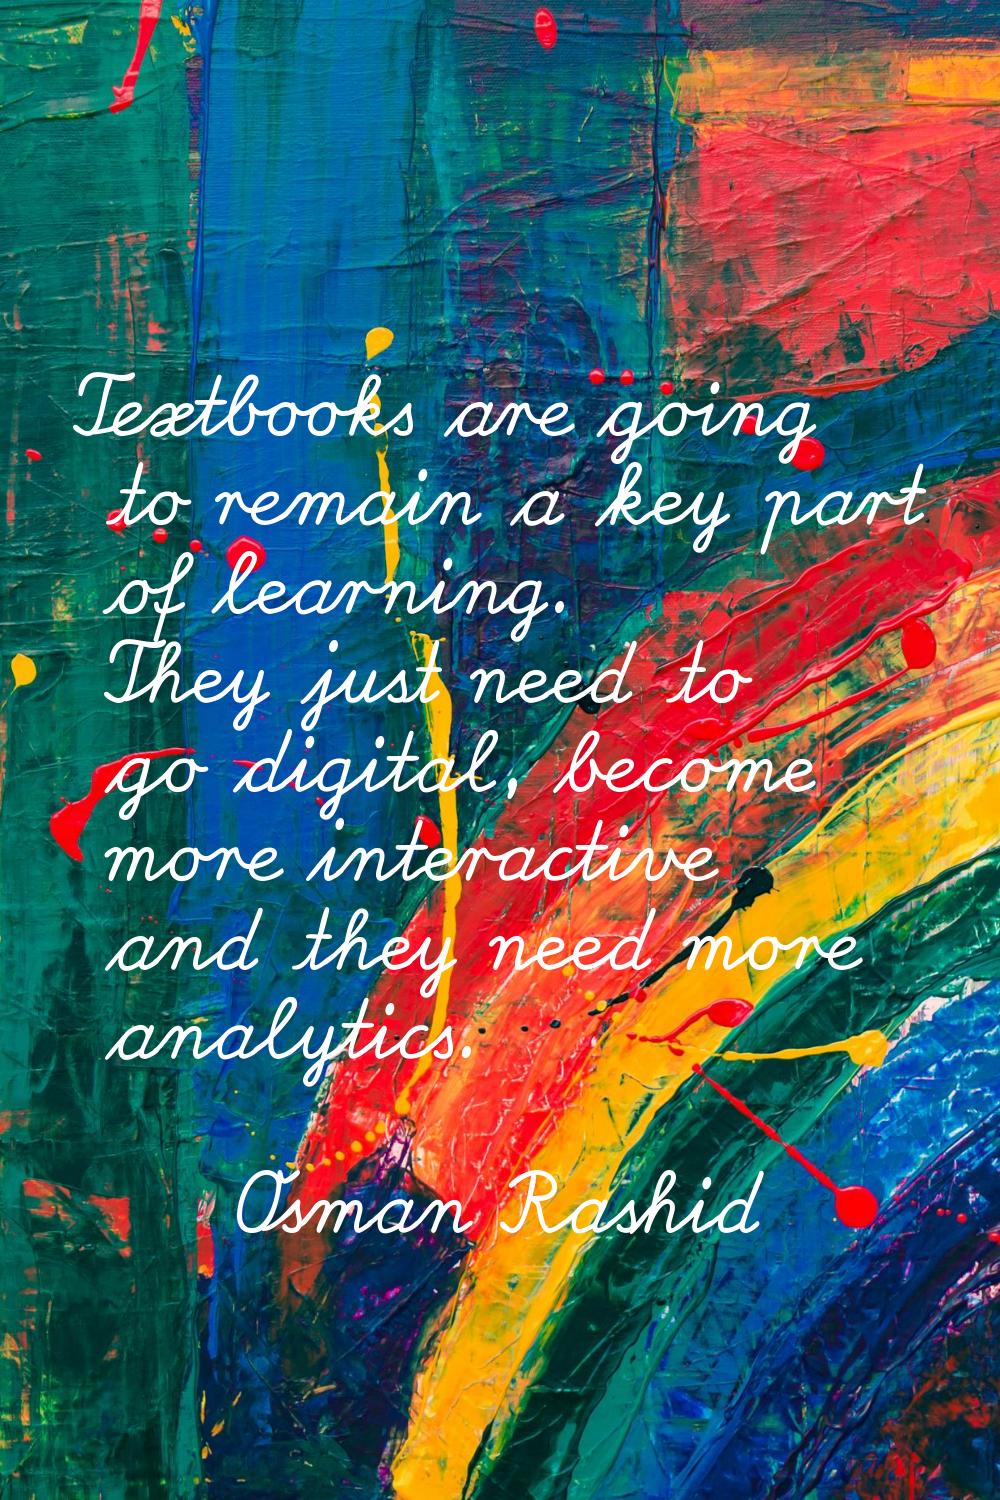 Textbooks are going to remain a key part of learning. They just need to go digital, become more int